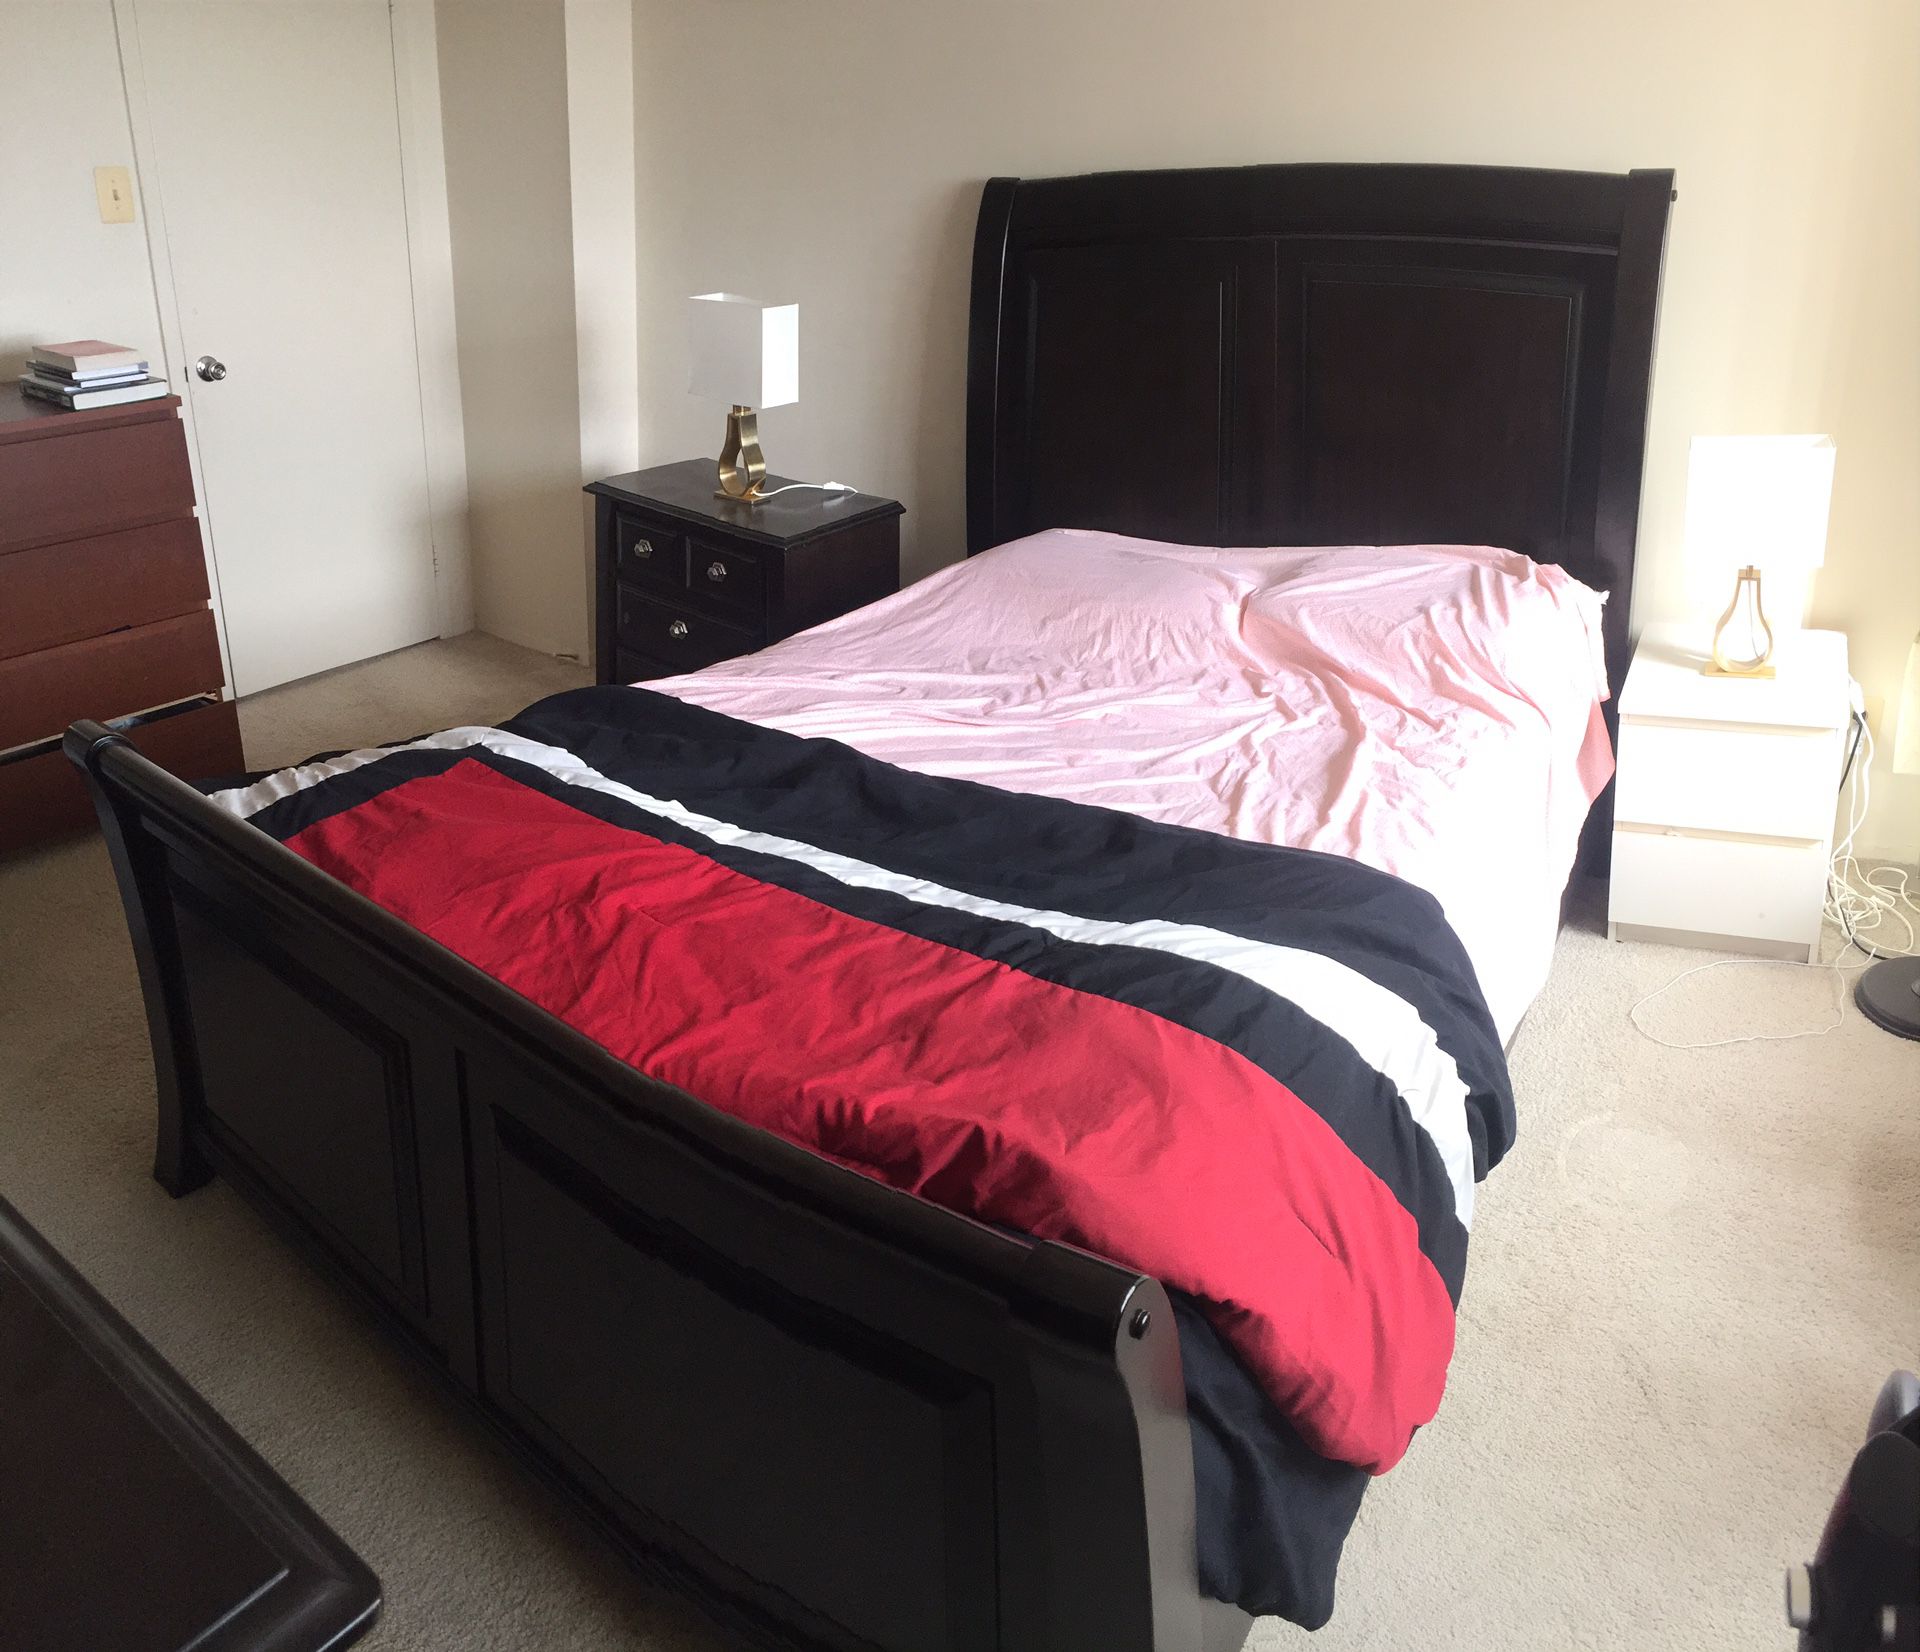 Queen size bed, matching dresser and side table